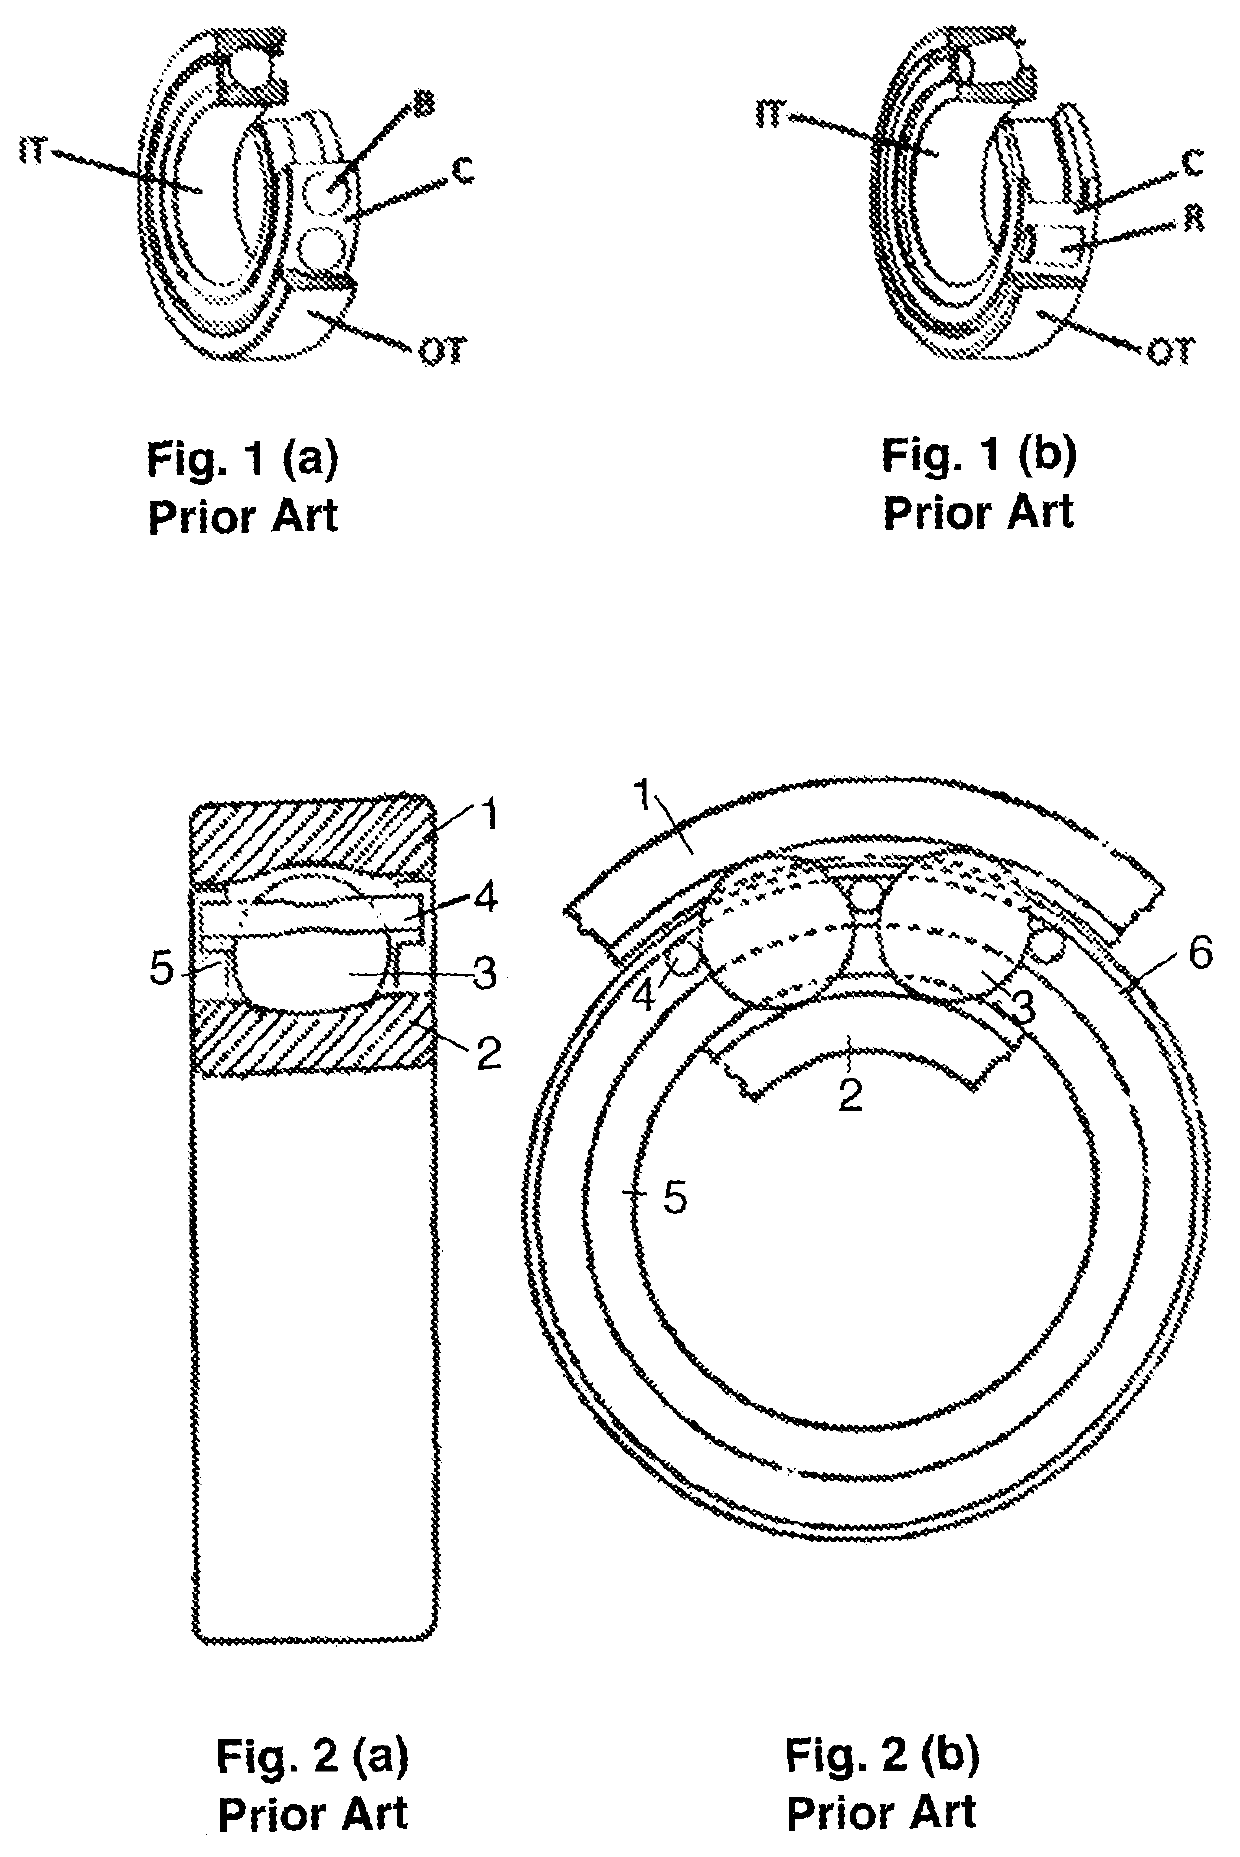 Angular contact and purely axial bearings with anti-friction separators